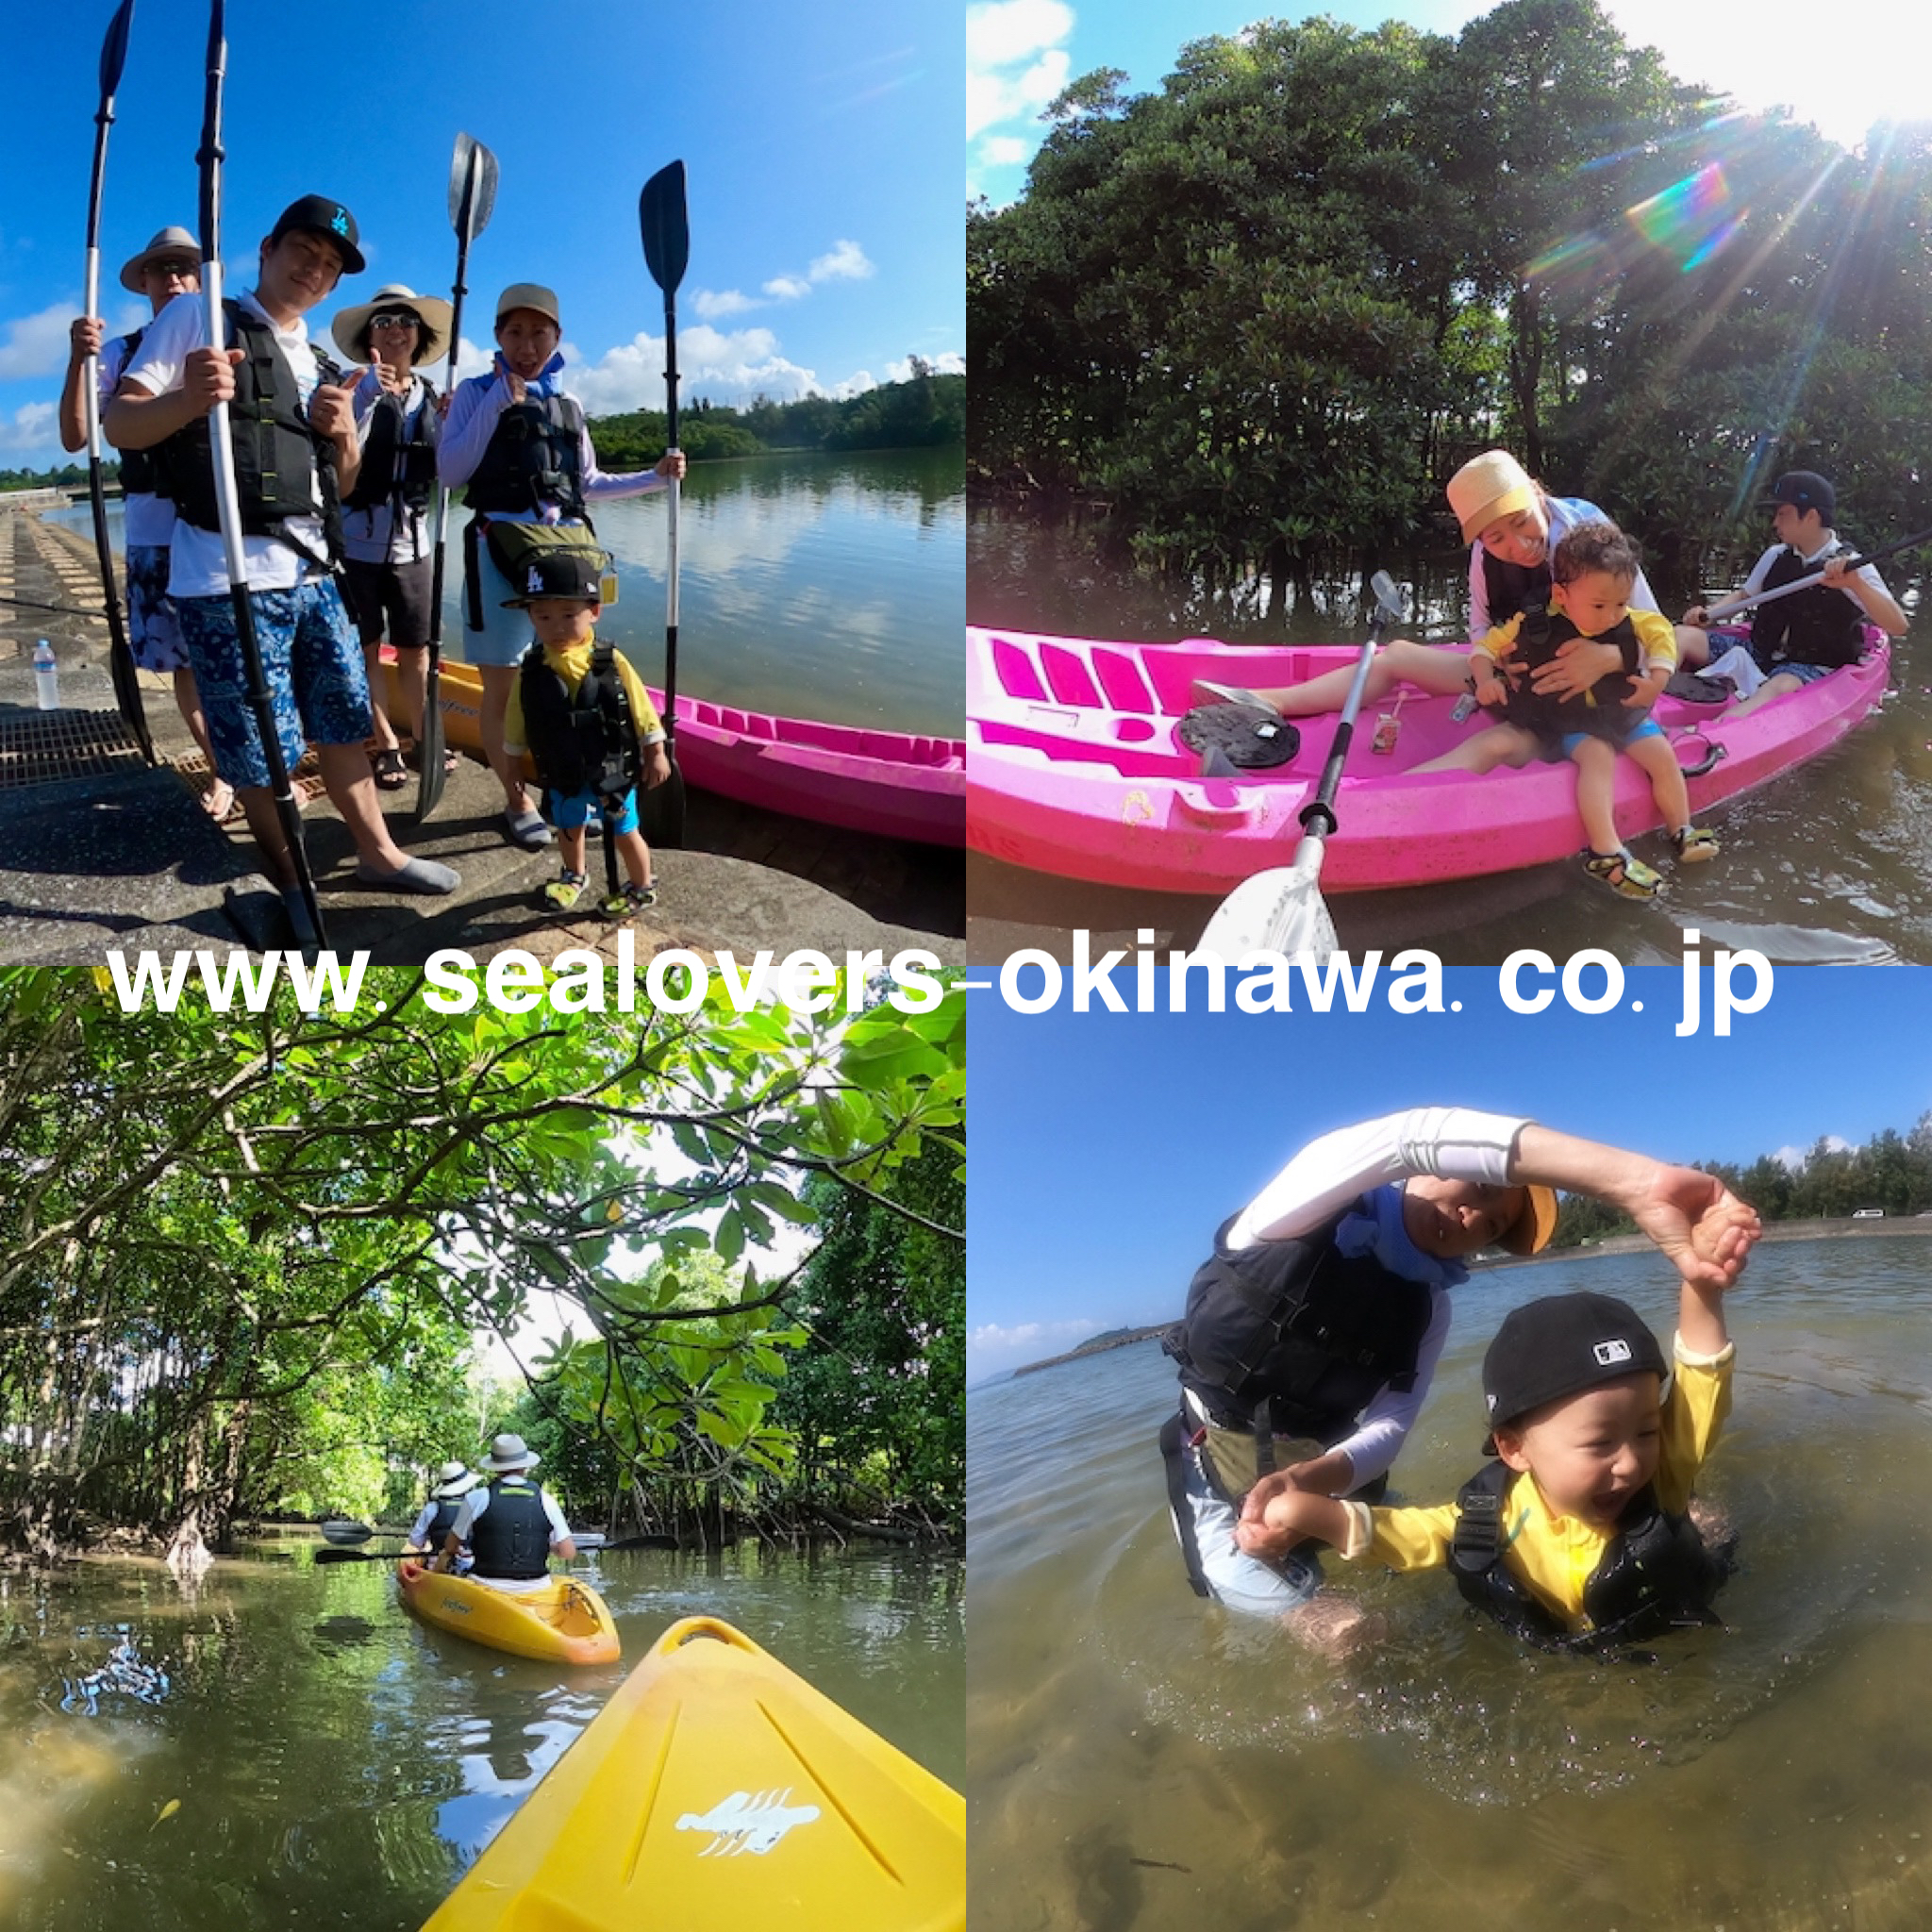 With measures taken against cold it is possible to enjoy the activity even in winter! Mangrove and sea kayaking!!